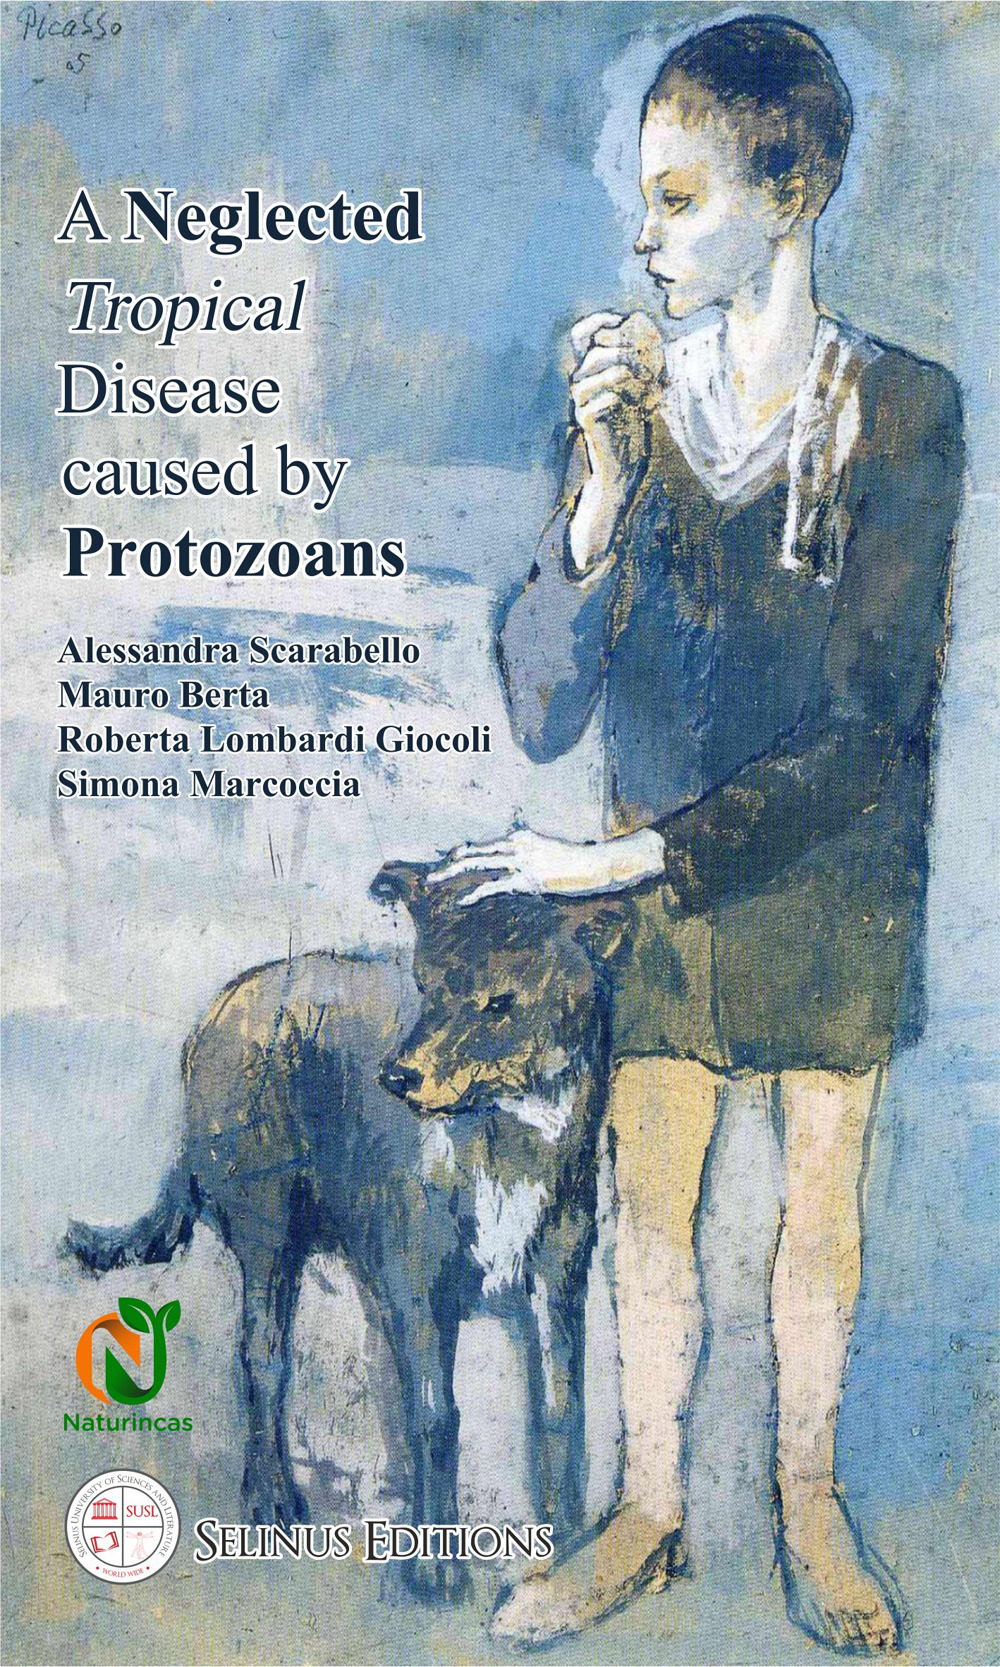 One negletted tropical disease by protozoans